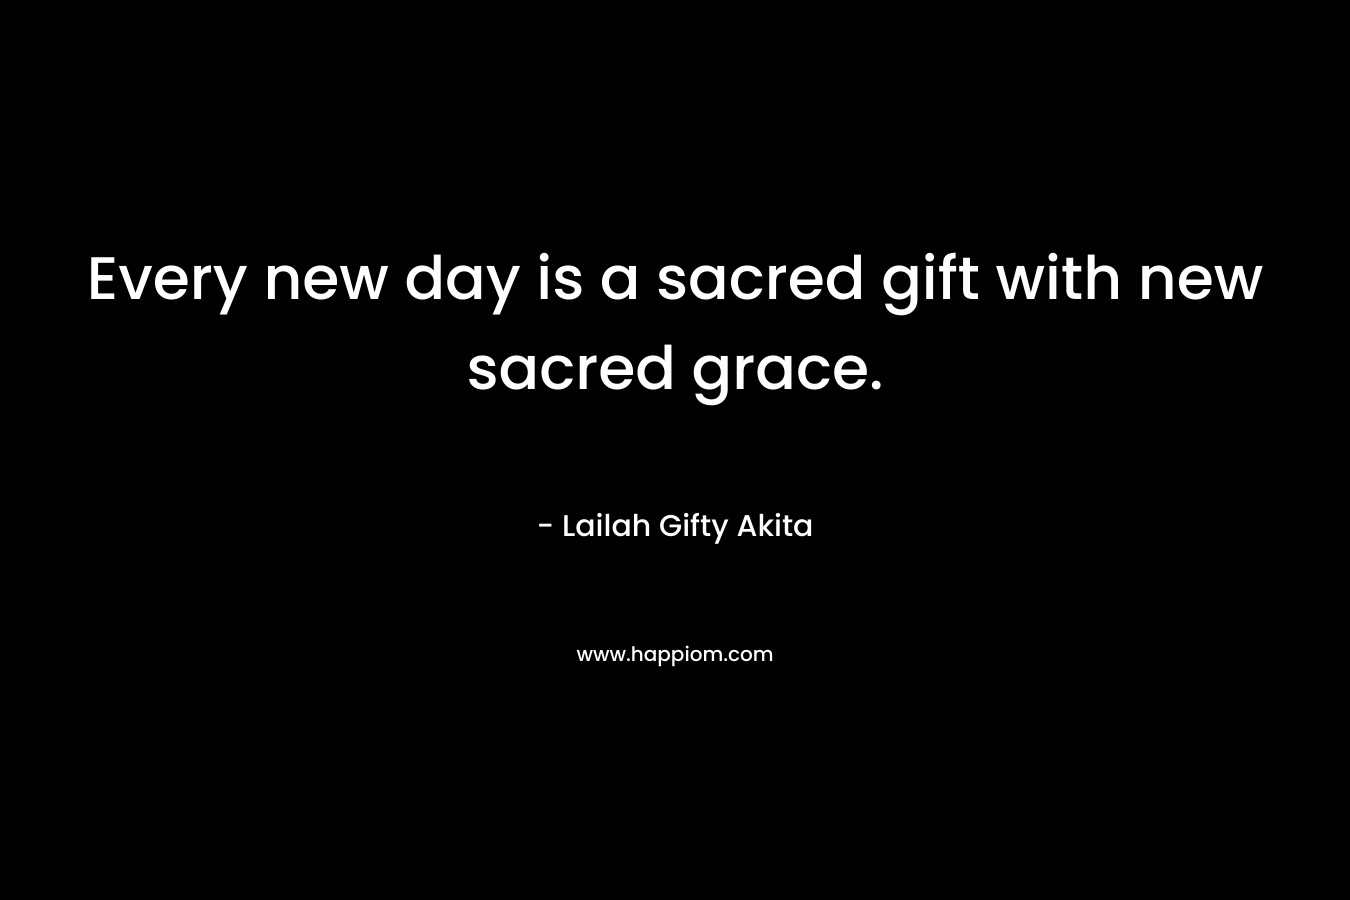 Every new day is a sacred gift with new sacred grace.